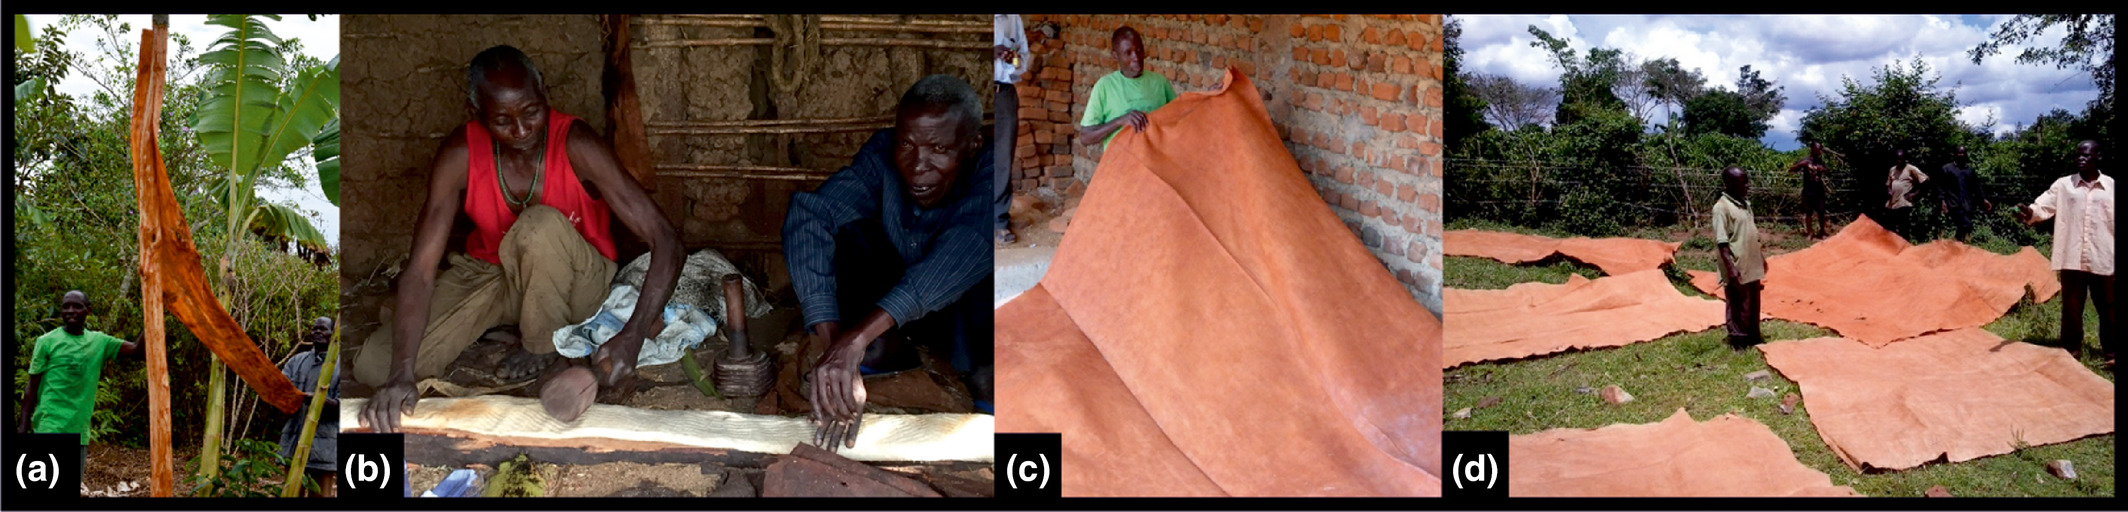 Stages of bark cloth production including harvesting (a), fabrication (b), large sheets dried under sunlight (c) and quality inspection by Bukomansimbi Organic Tree Farmers Association representatives (d). (Image taken from journal article)